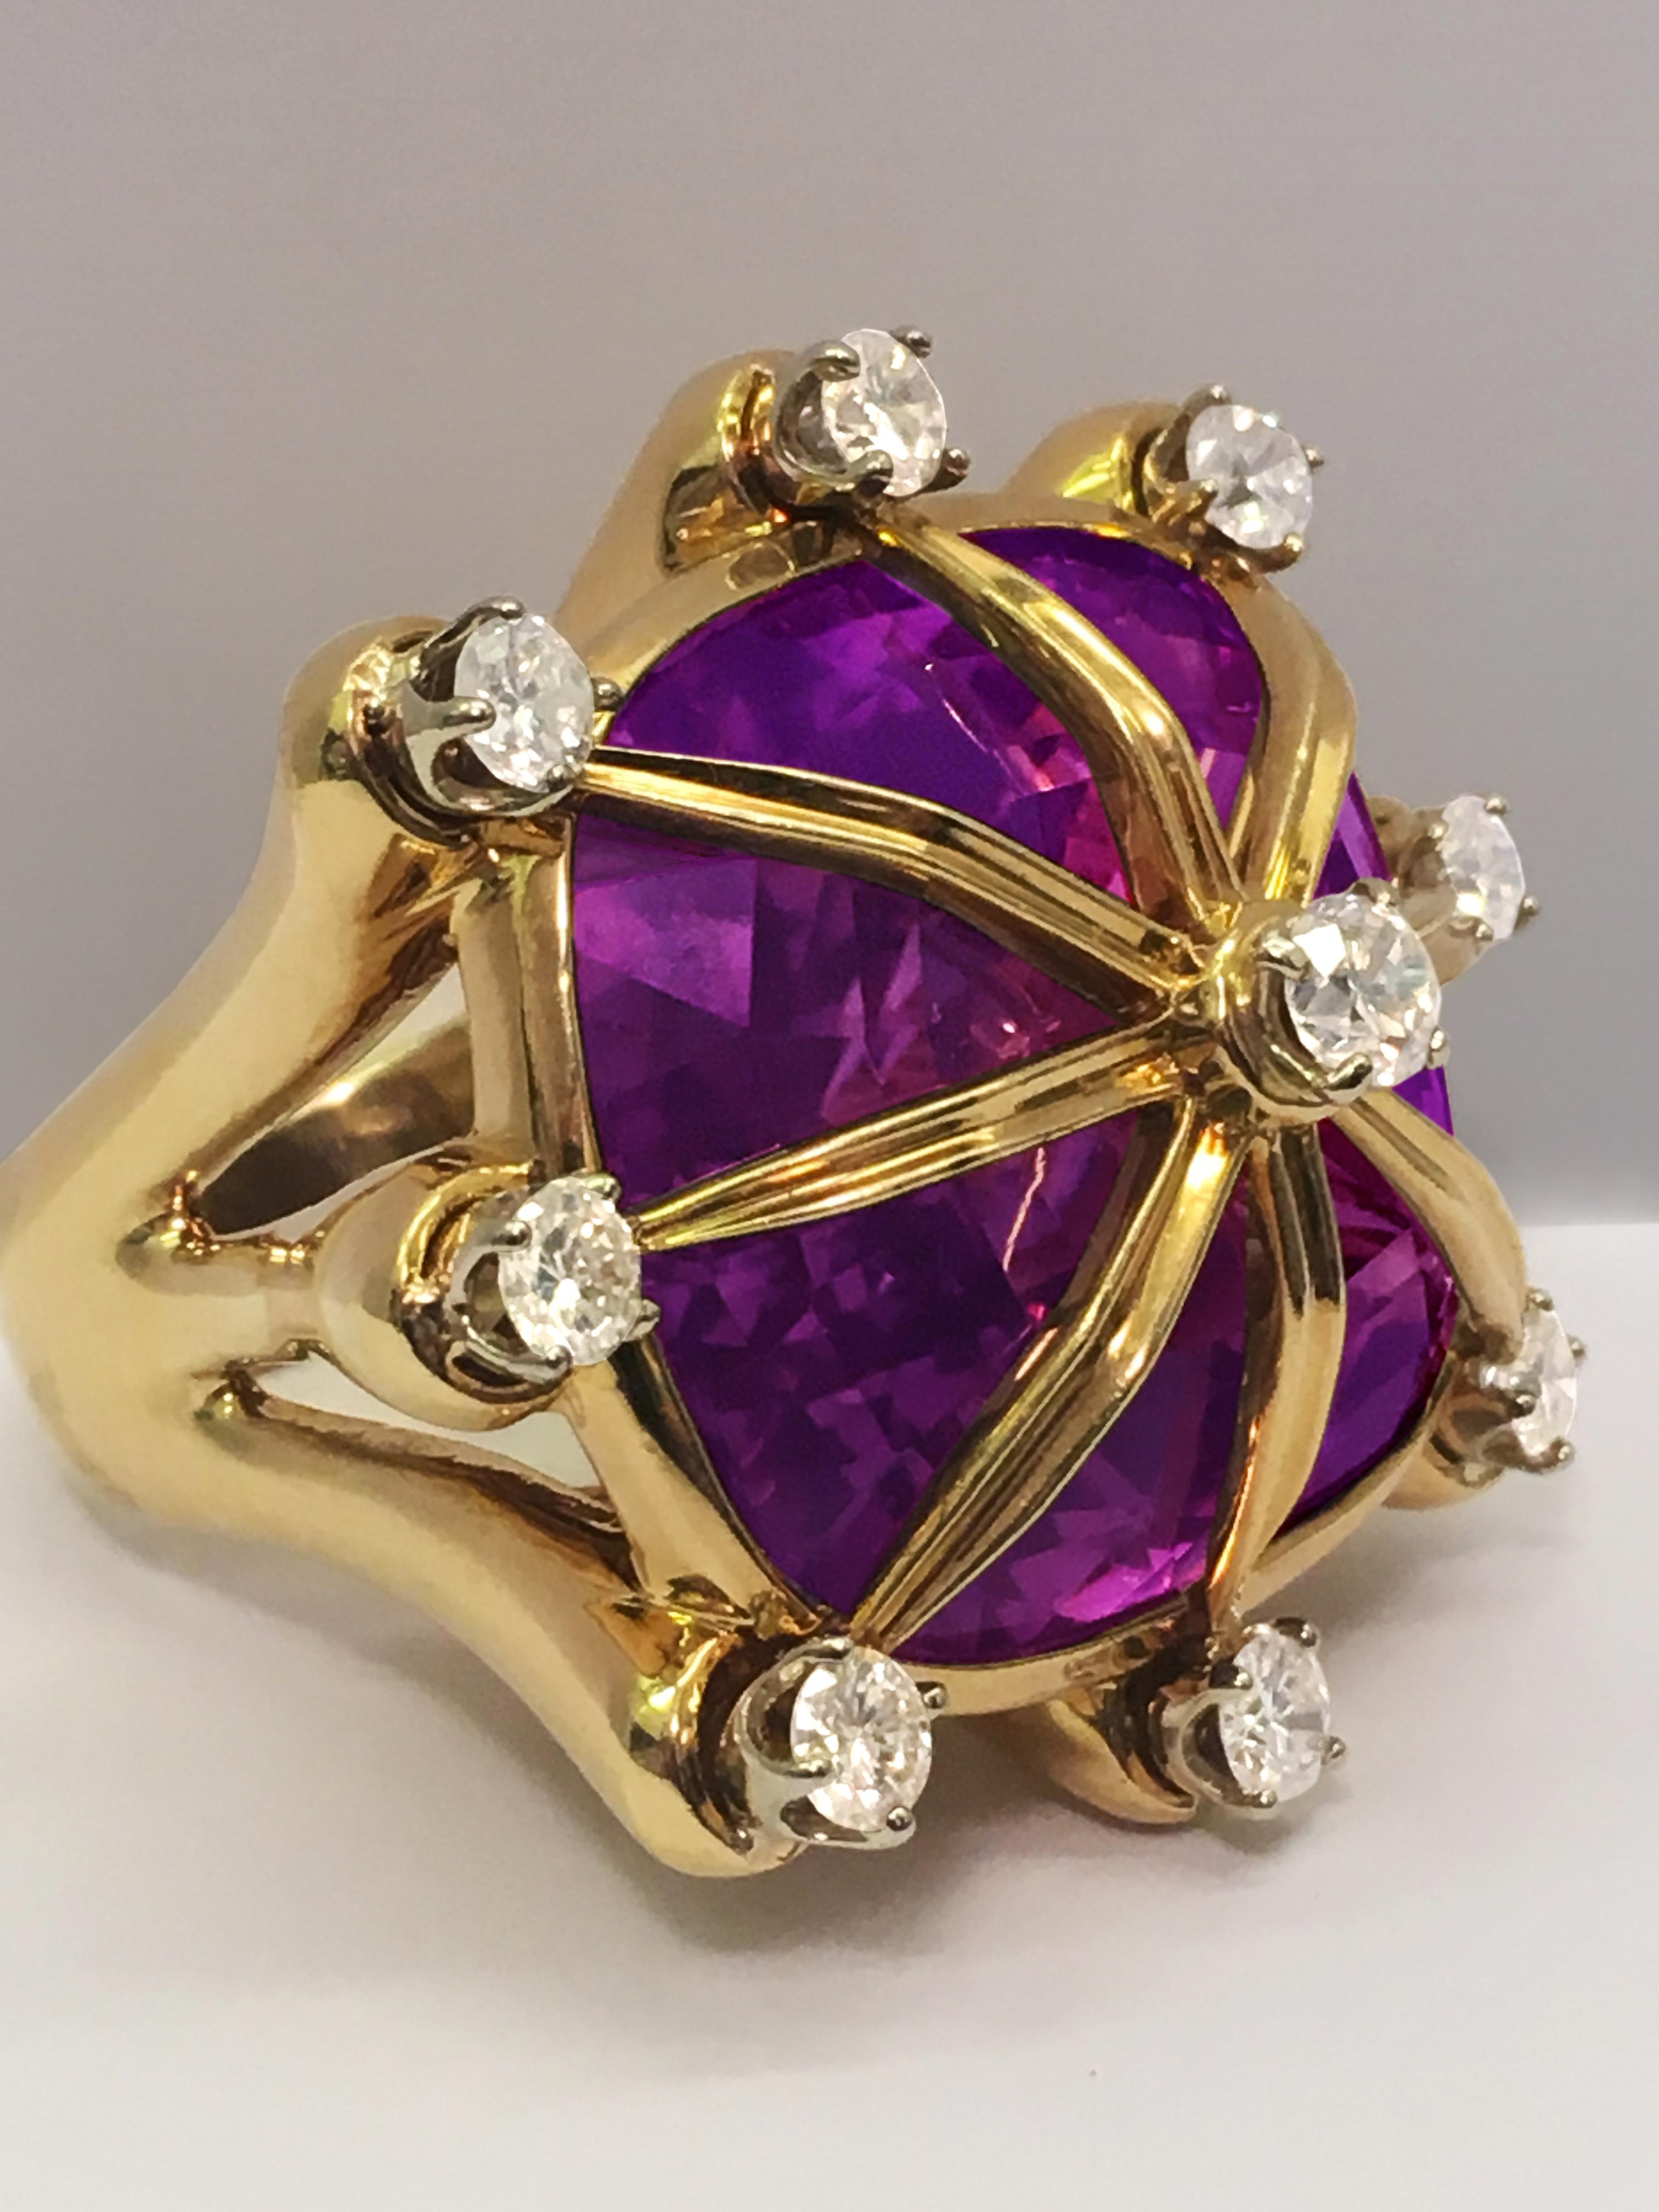 Women's Amethyst, Diamond and 18 Karat Gold Ring by Tony Duquette For Sale